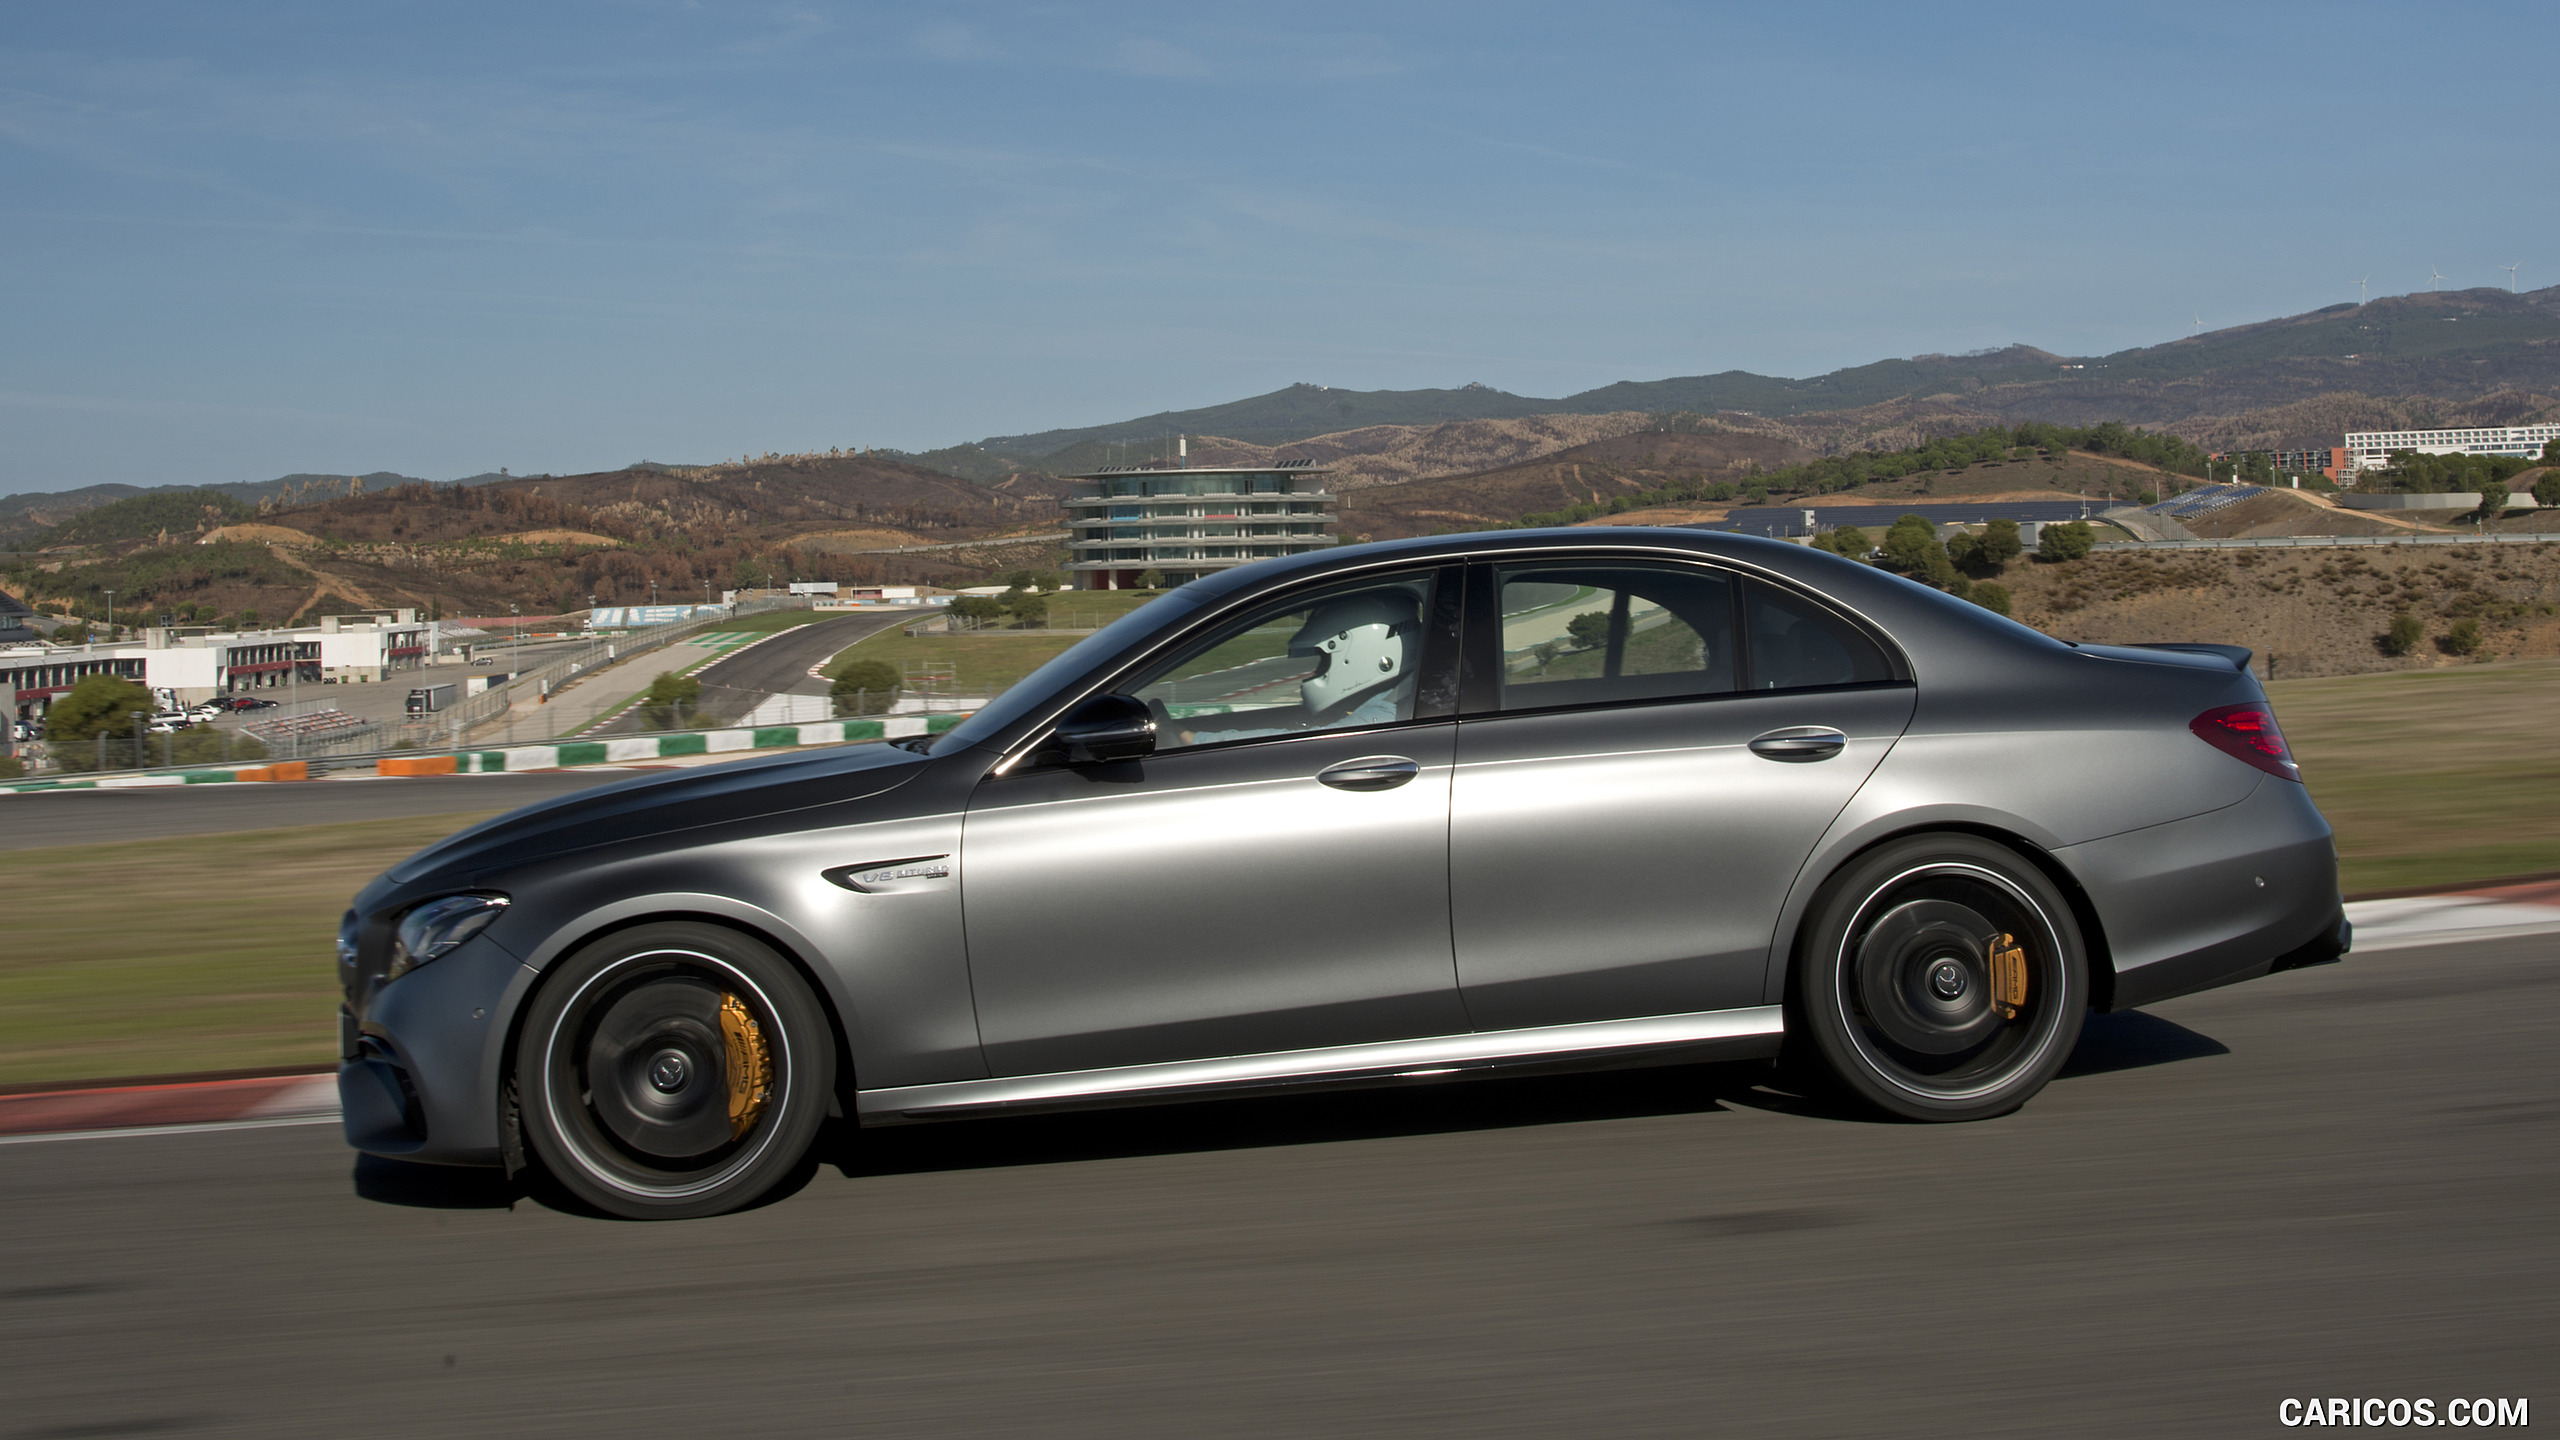 2018 Mercedes-AMG E63 S 4MATIC+ - Side, #271 of 323